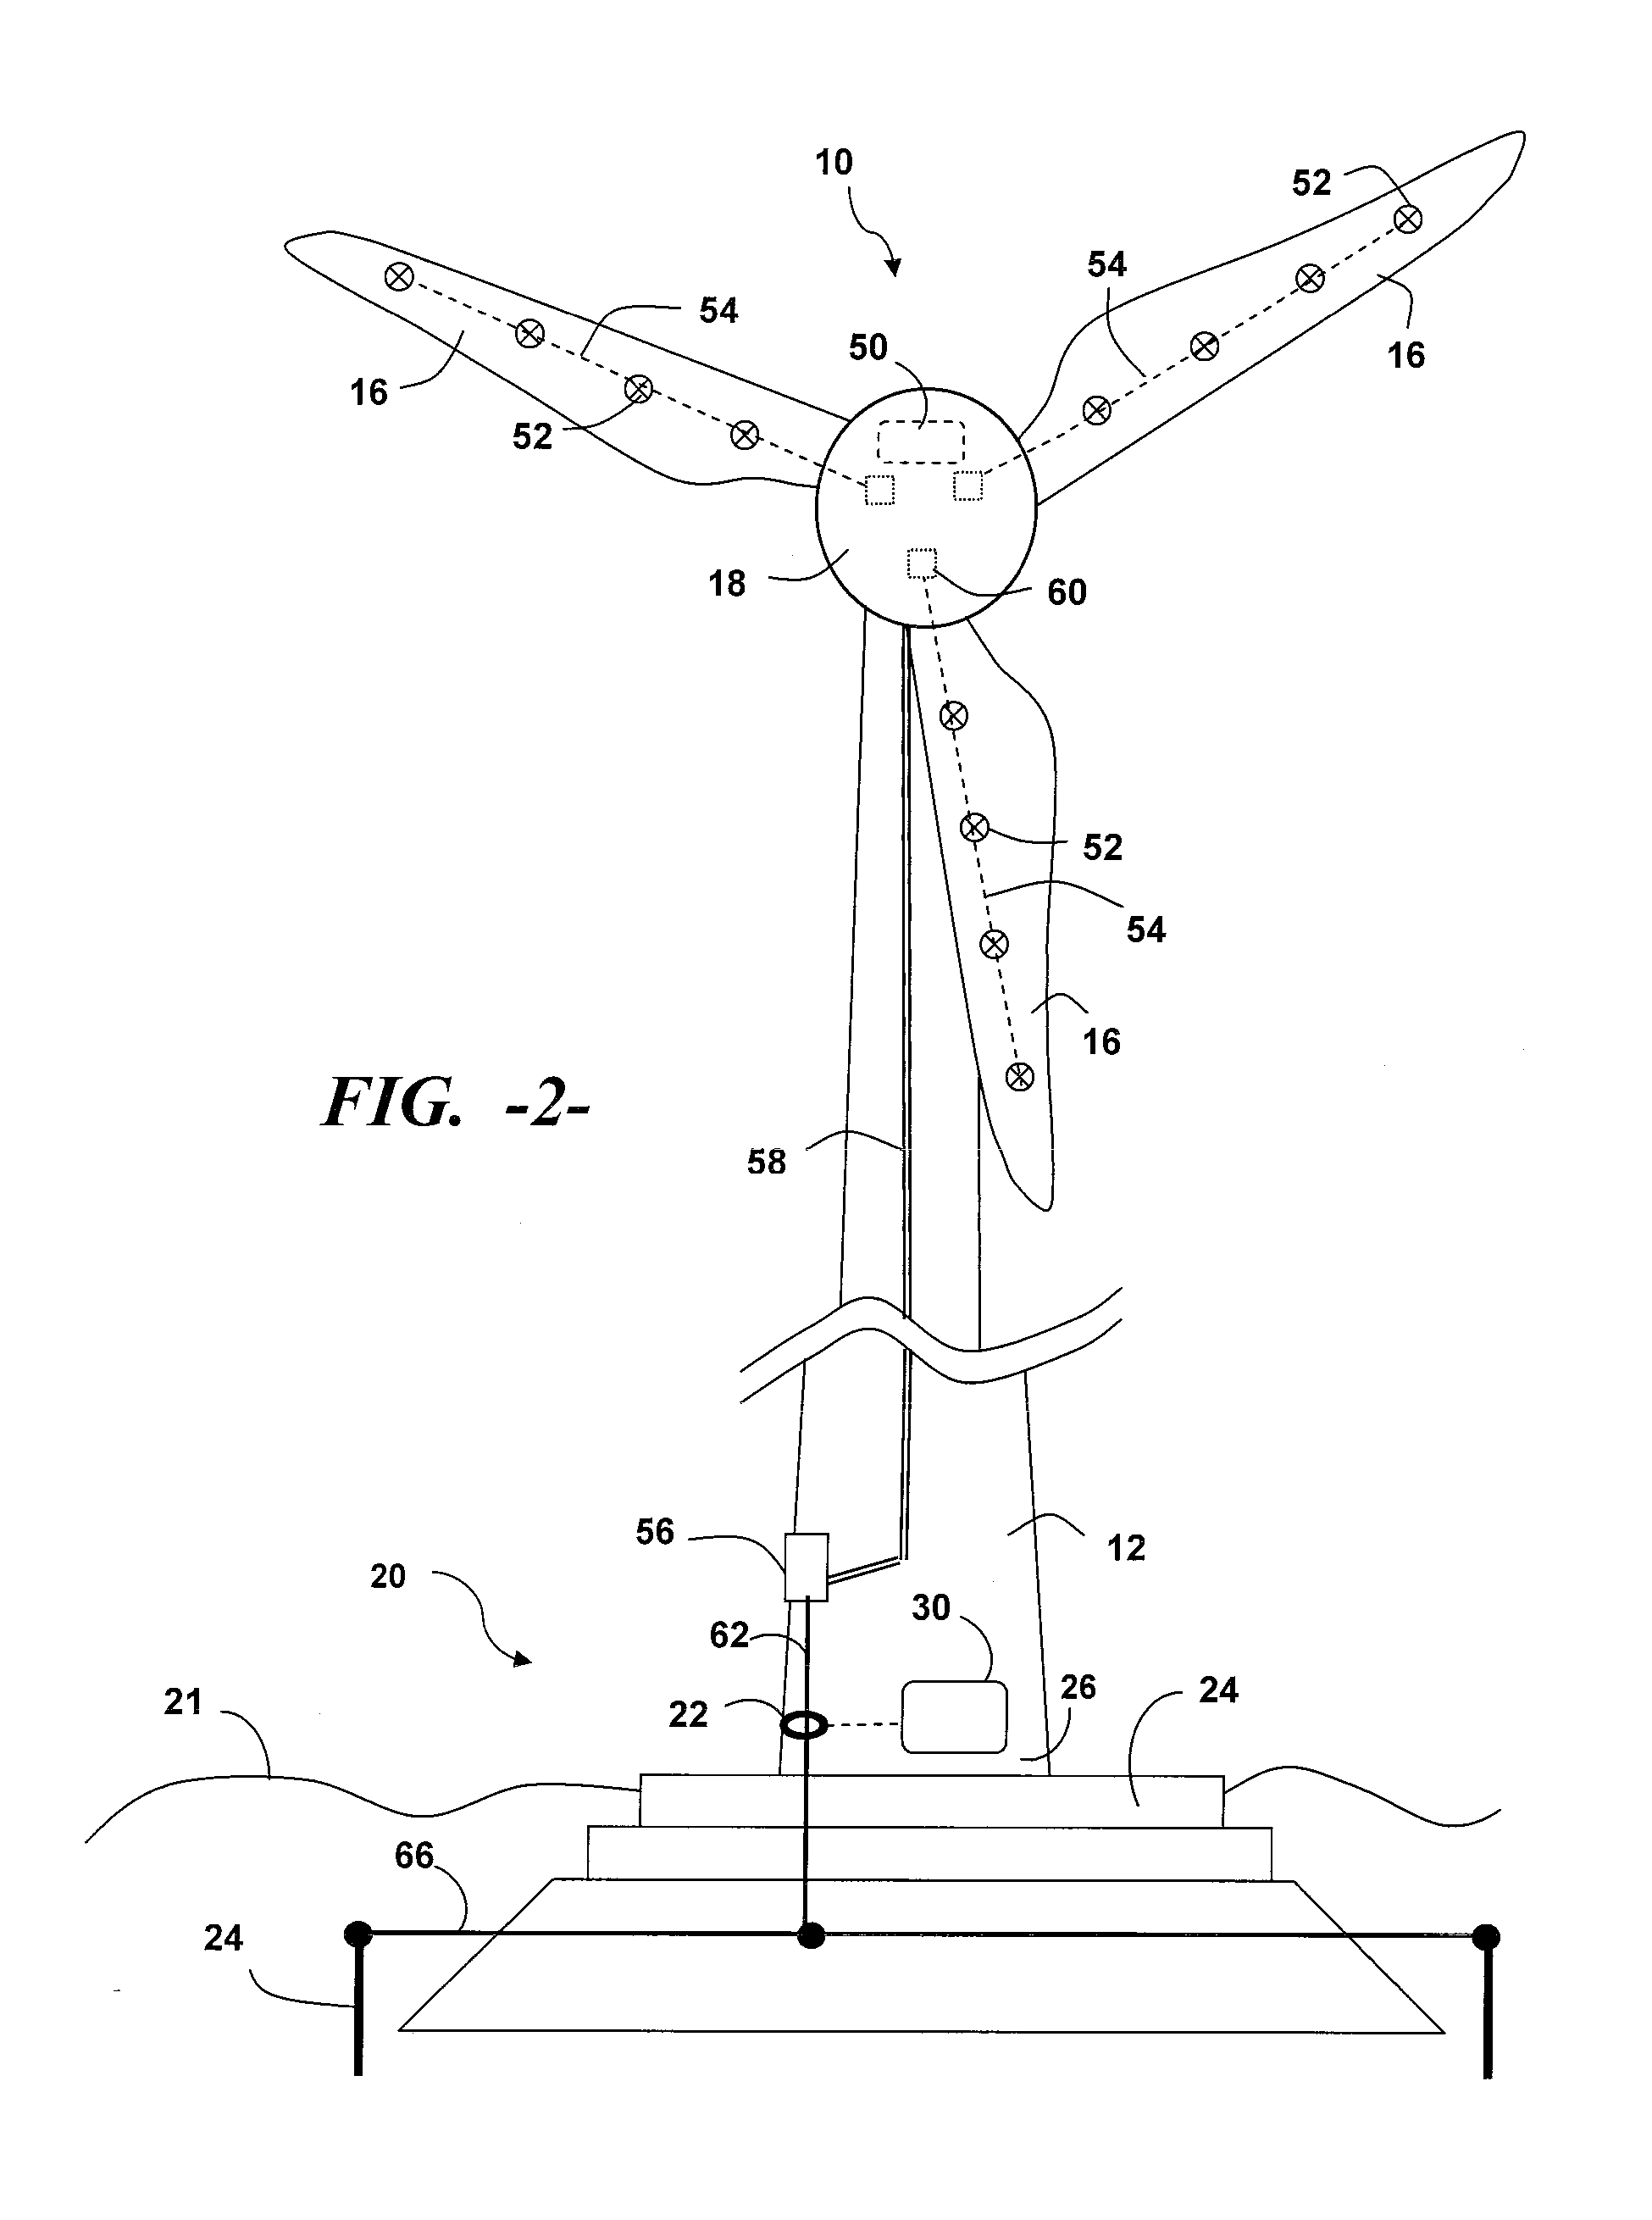 System and method for detecting lightning strikes on a wind turbine